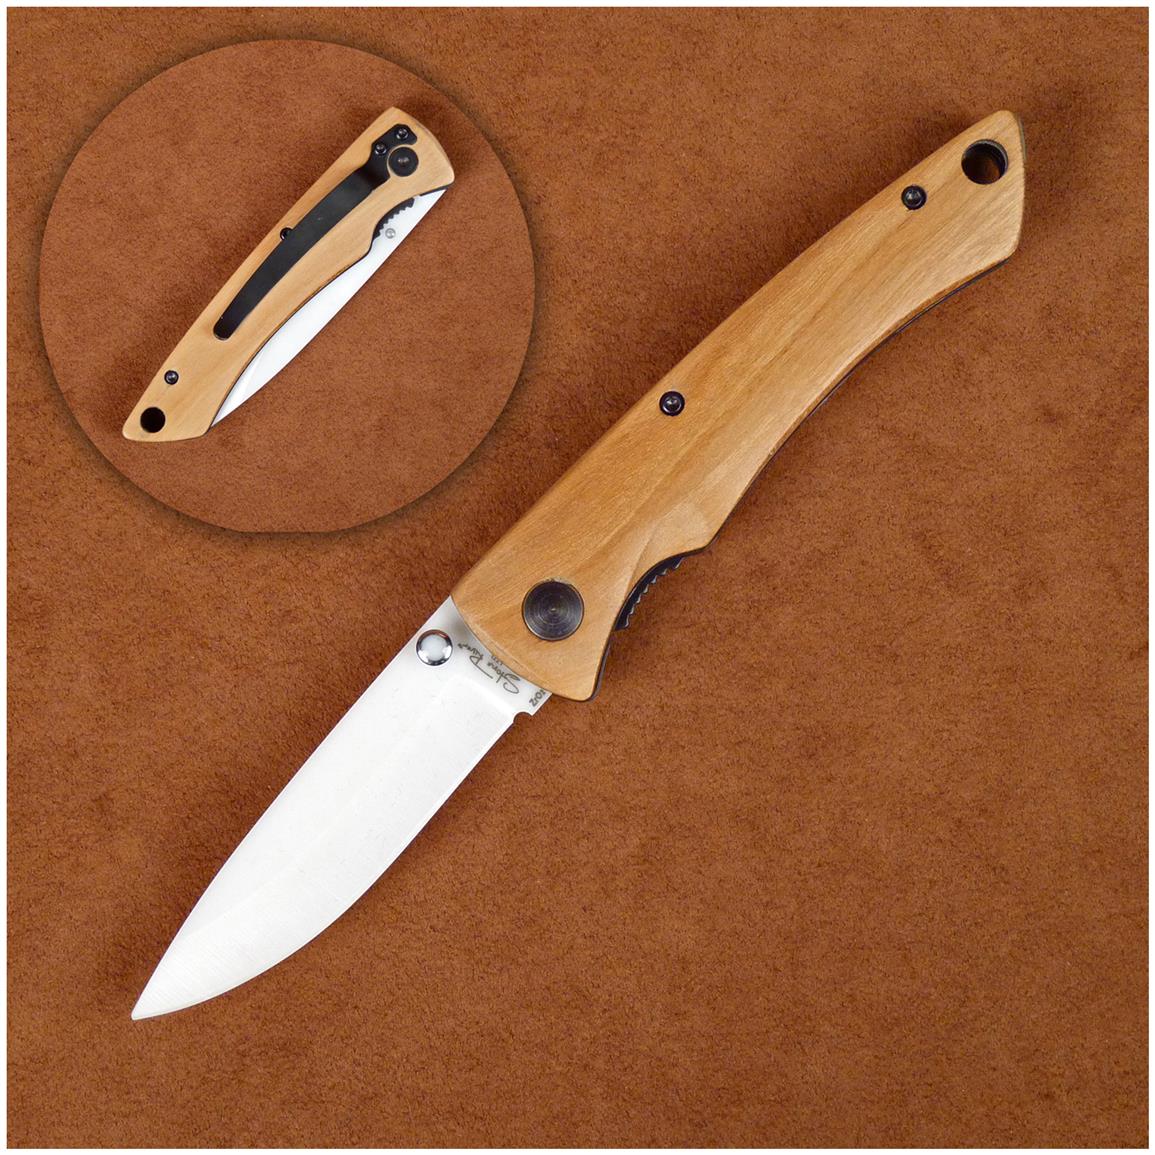 Stone River Gear Ceramic Folding Knife with Olivewood Handle - 617215 ...